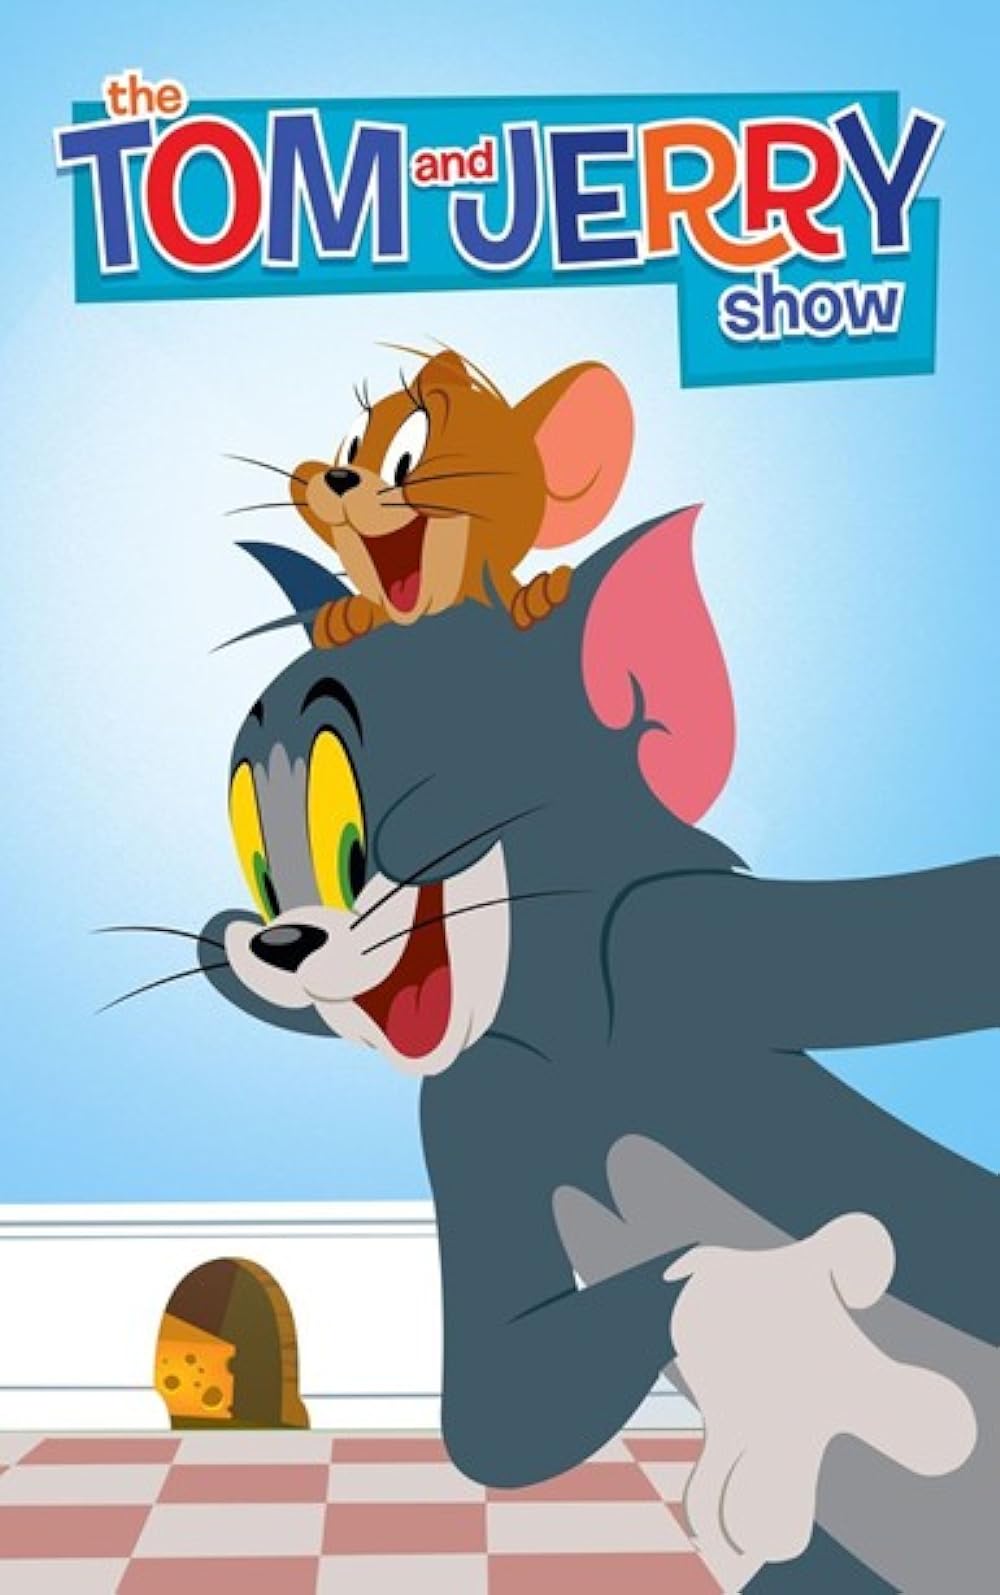 Download The Tom and Jerry Show Season 1 Episodes In Hindi - Tamil - Telugu - English (Multi Audio) 